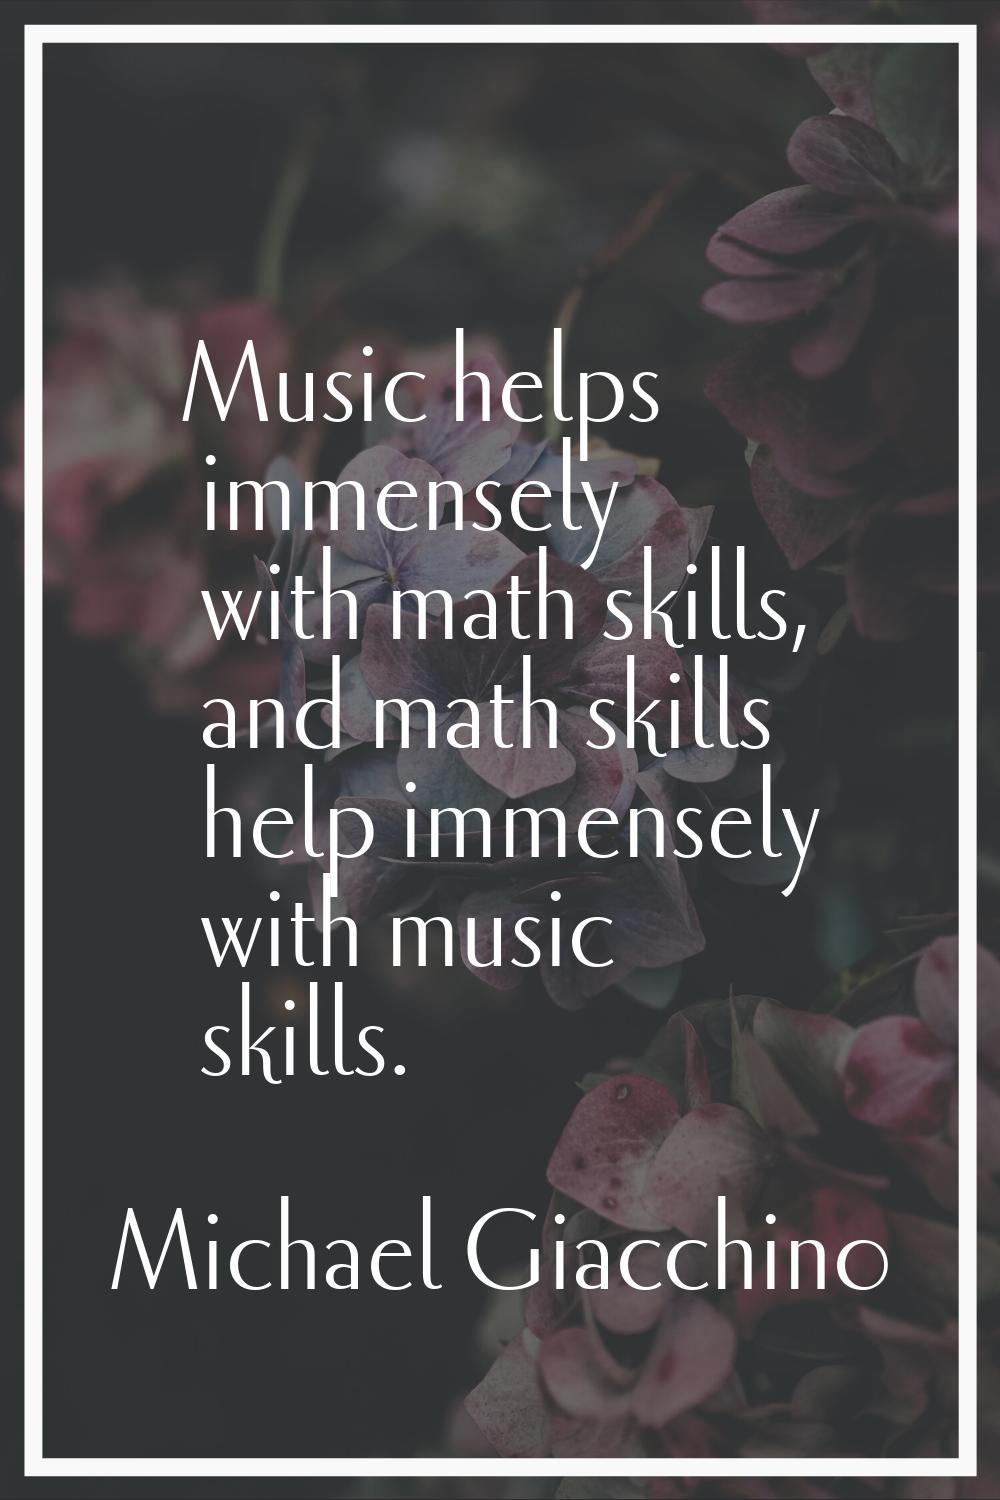 Music helps immensely with math skills, and math skills help immensely with music skills.